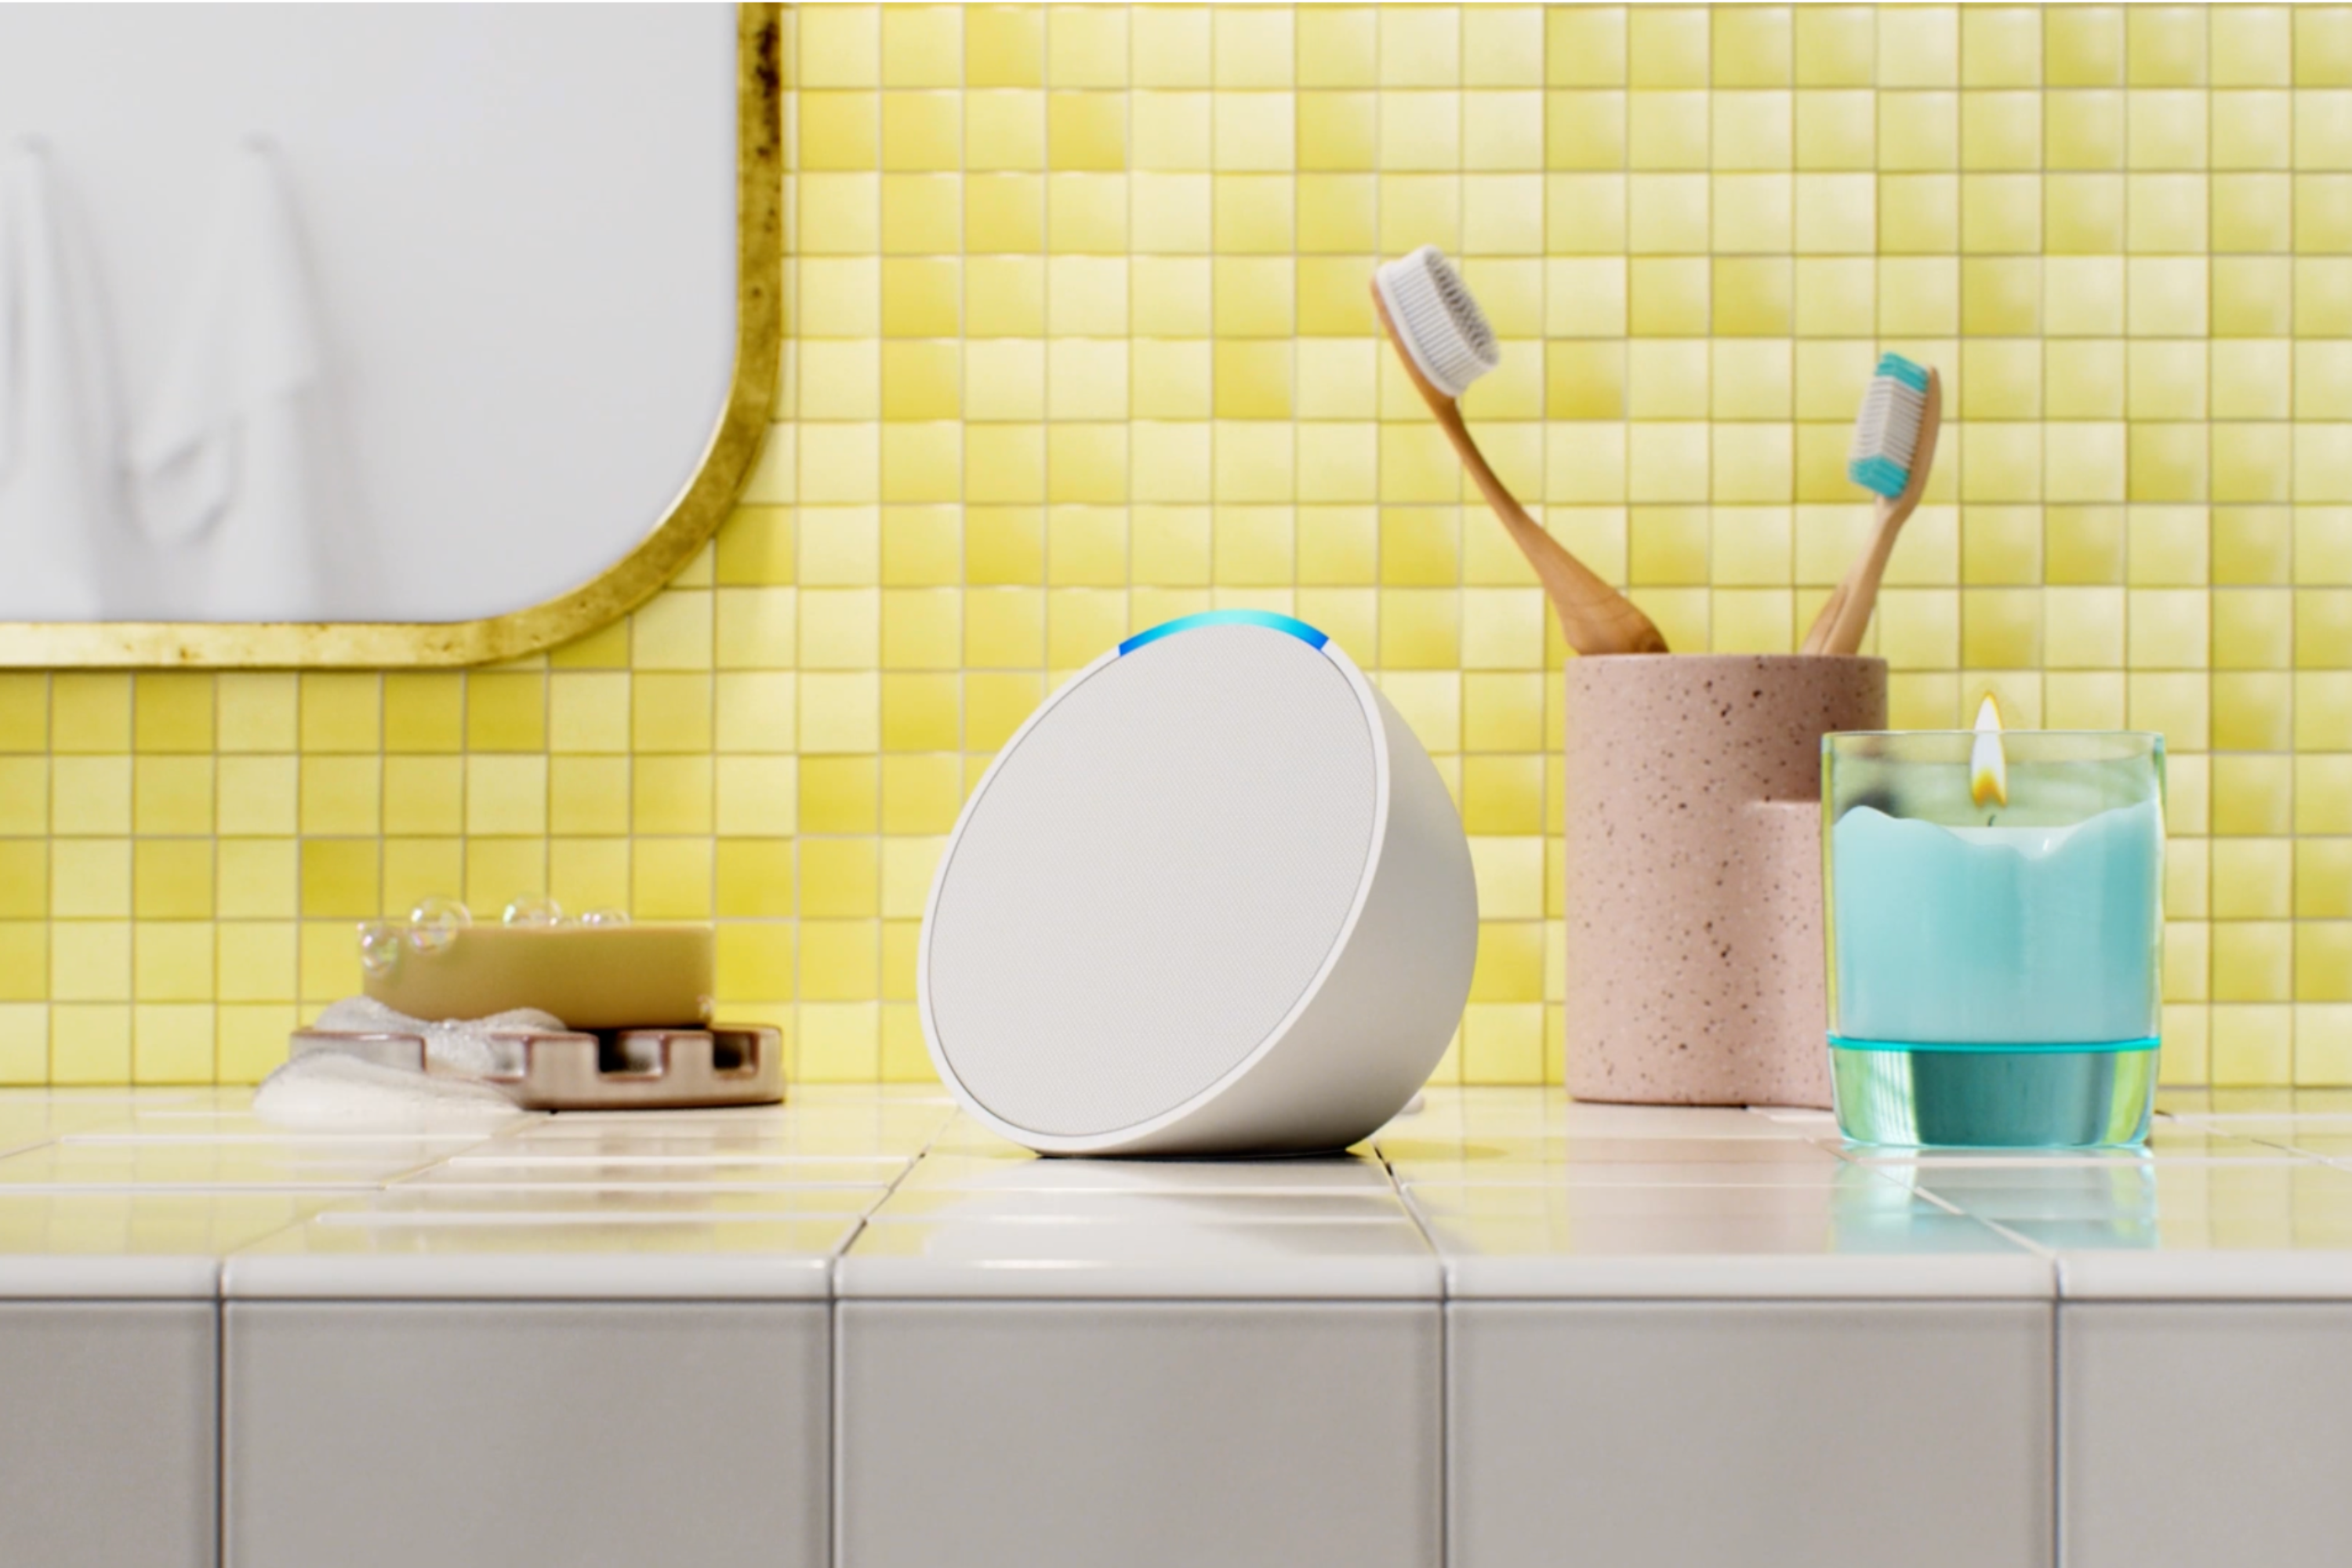 Amazon Echo Pop smart speaker in the bathroom with toothbrushes, sandle and soap in the background